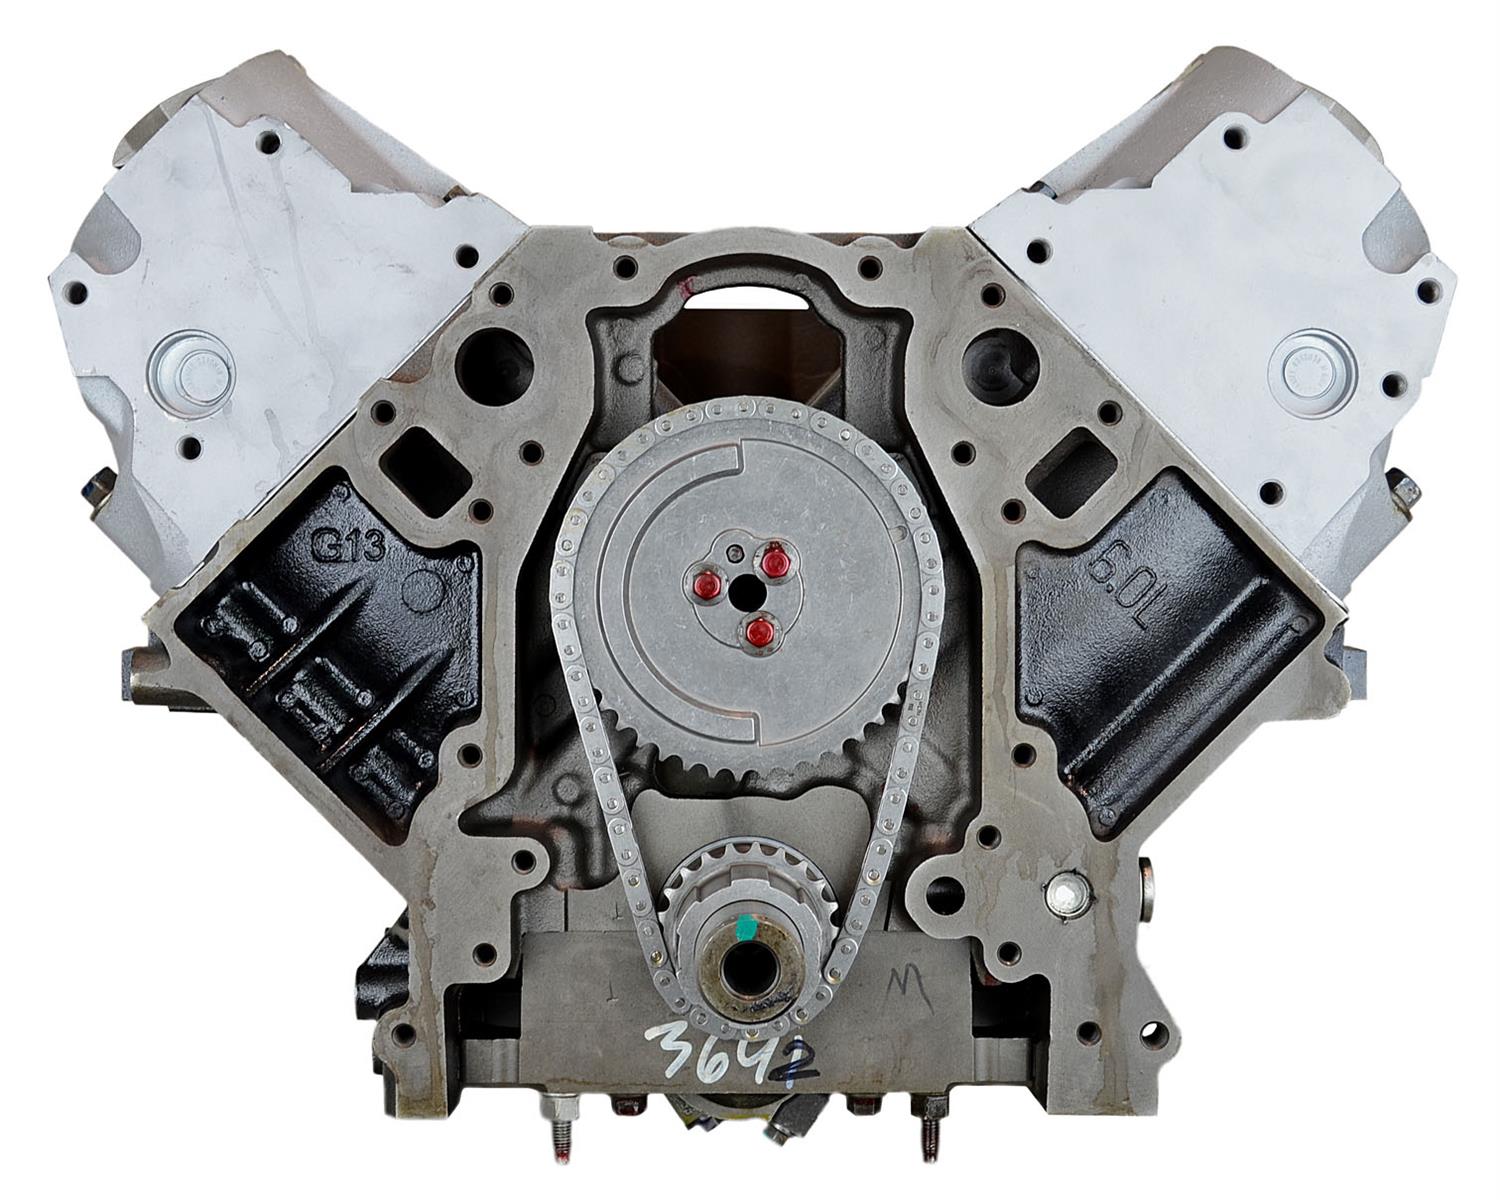 DCTK Remanufactured Crate Engine for 2002-2007 Cadillac/Chevy/GMC Truck & SUV with 6.0L V8